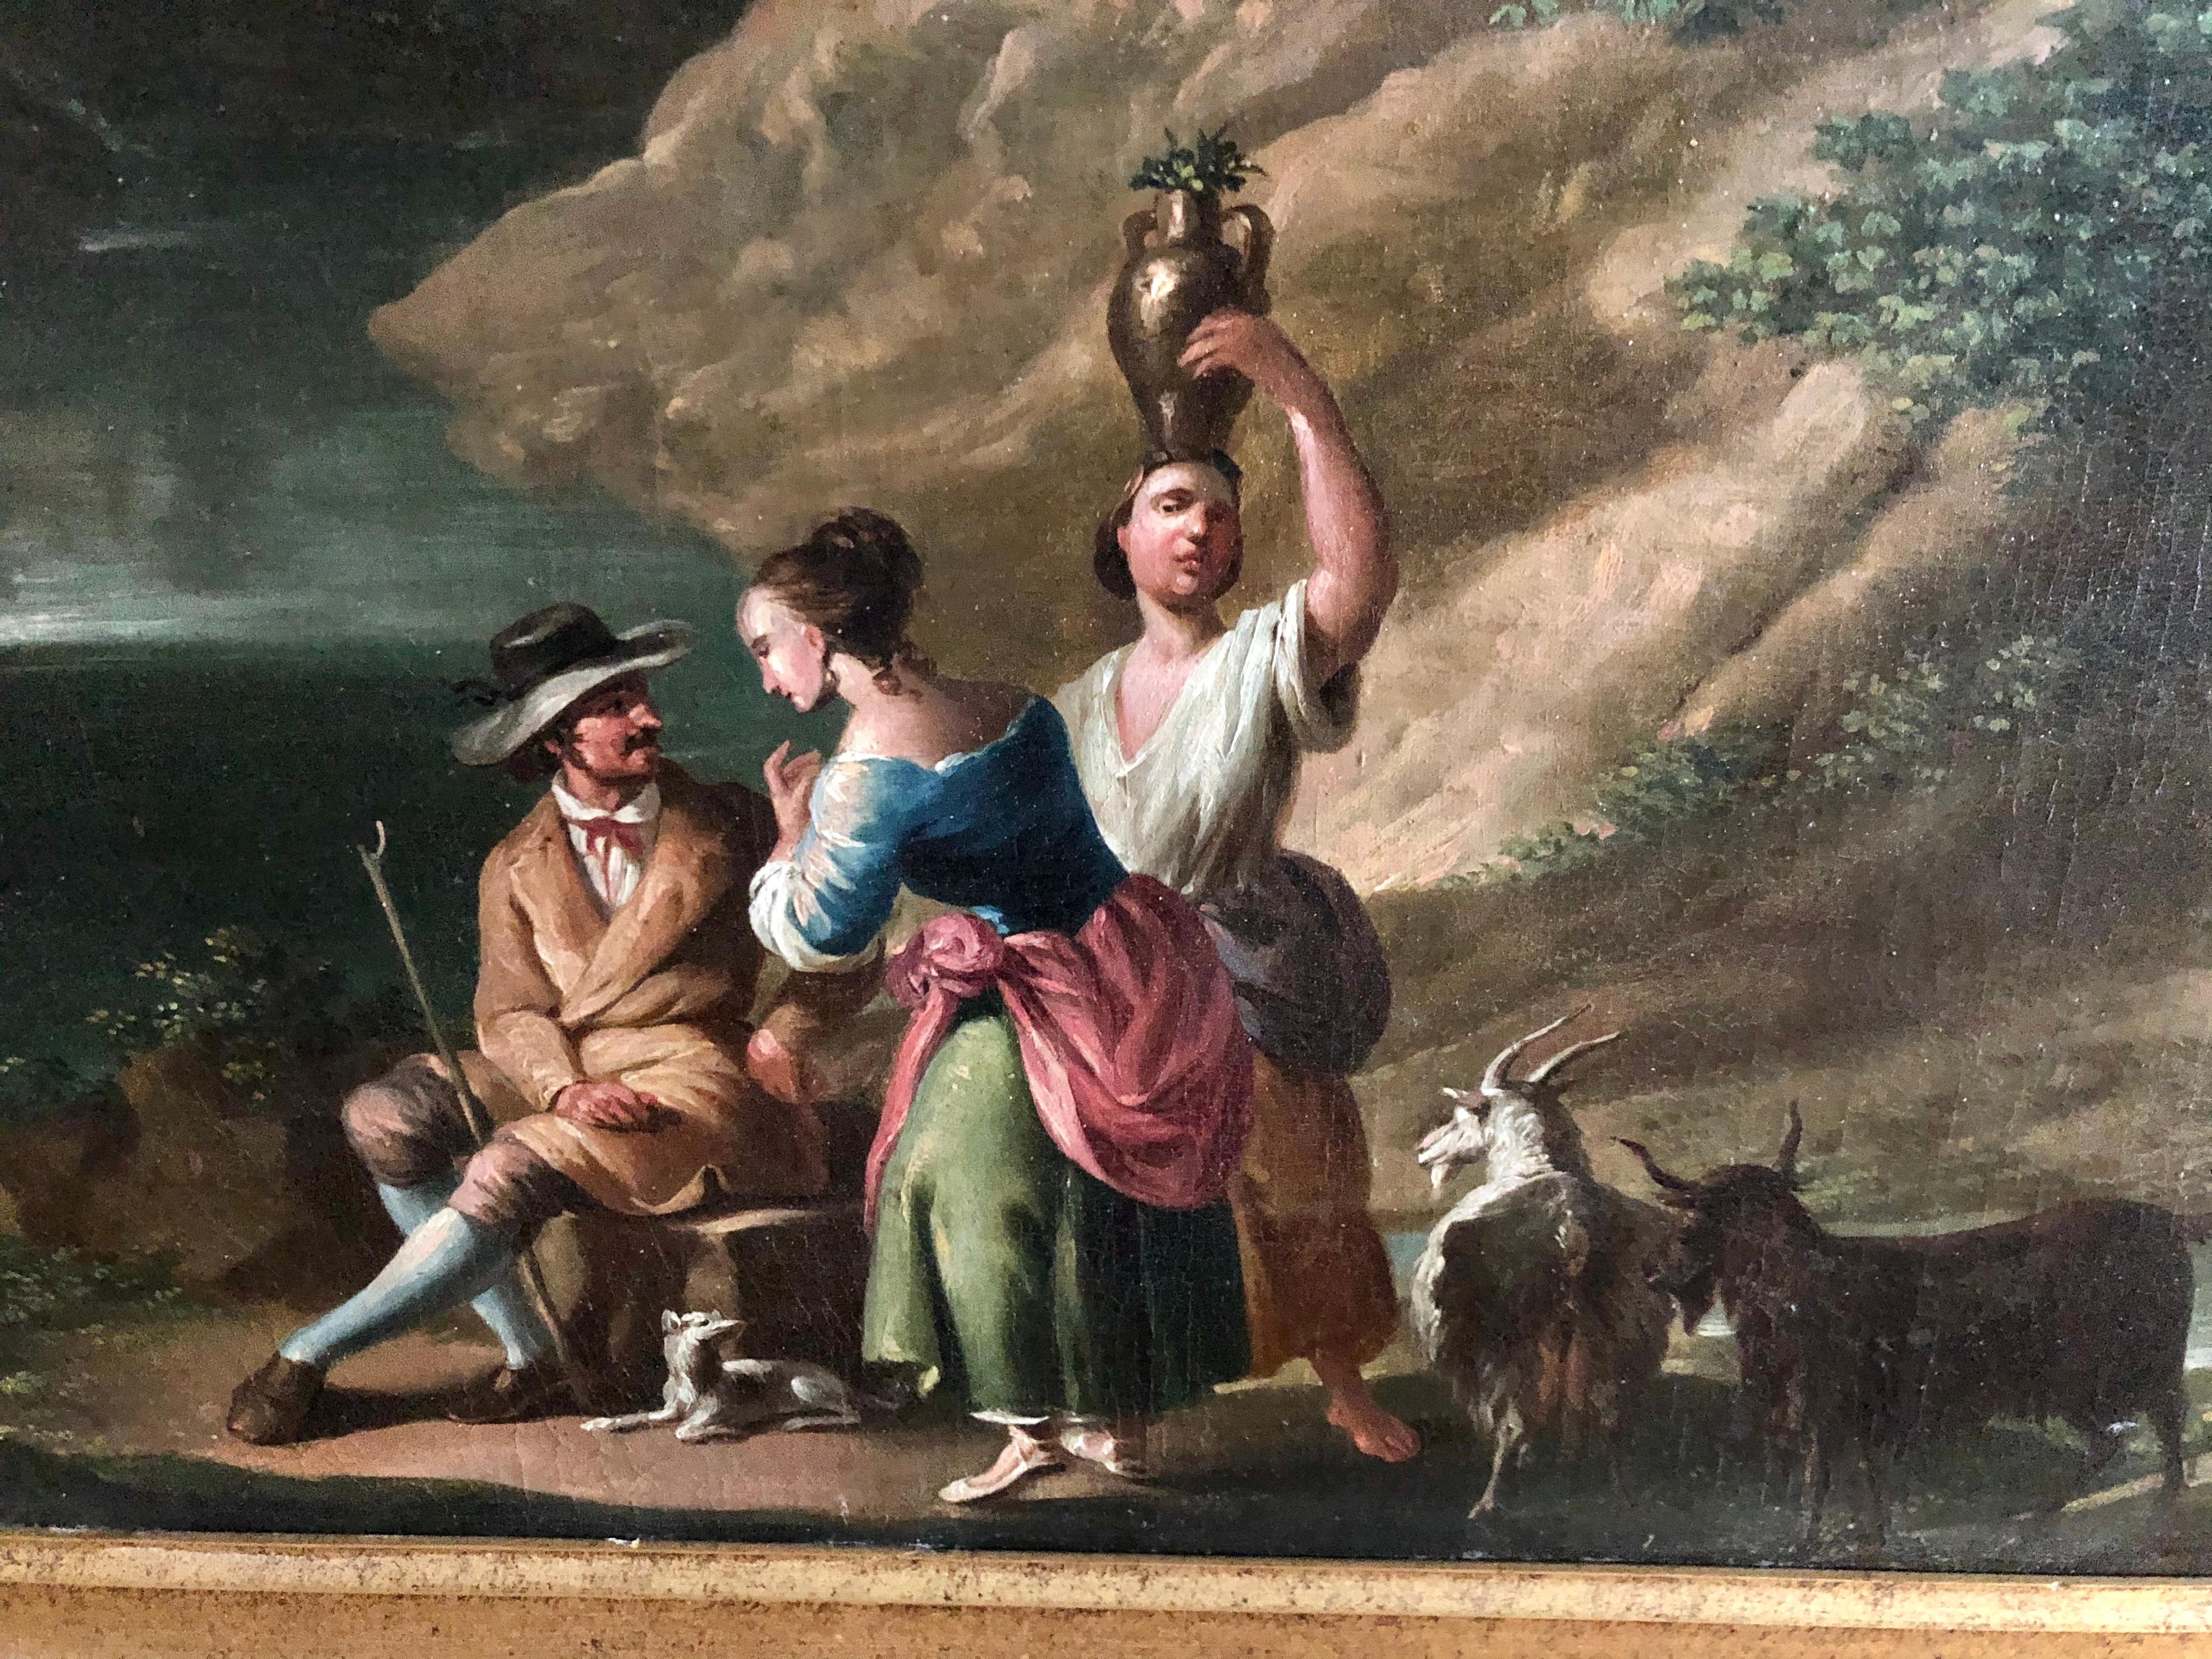 Unknown Spanish artist, 18th century, “A pastoral scene”, oil on canvas, verso inscribed: Montesinos Valencia. The frame has traces of restoration in three corners. Size without frame: 23.5 x 33.5 inches, with frame: 33.4 x 46.6 inches.